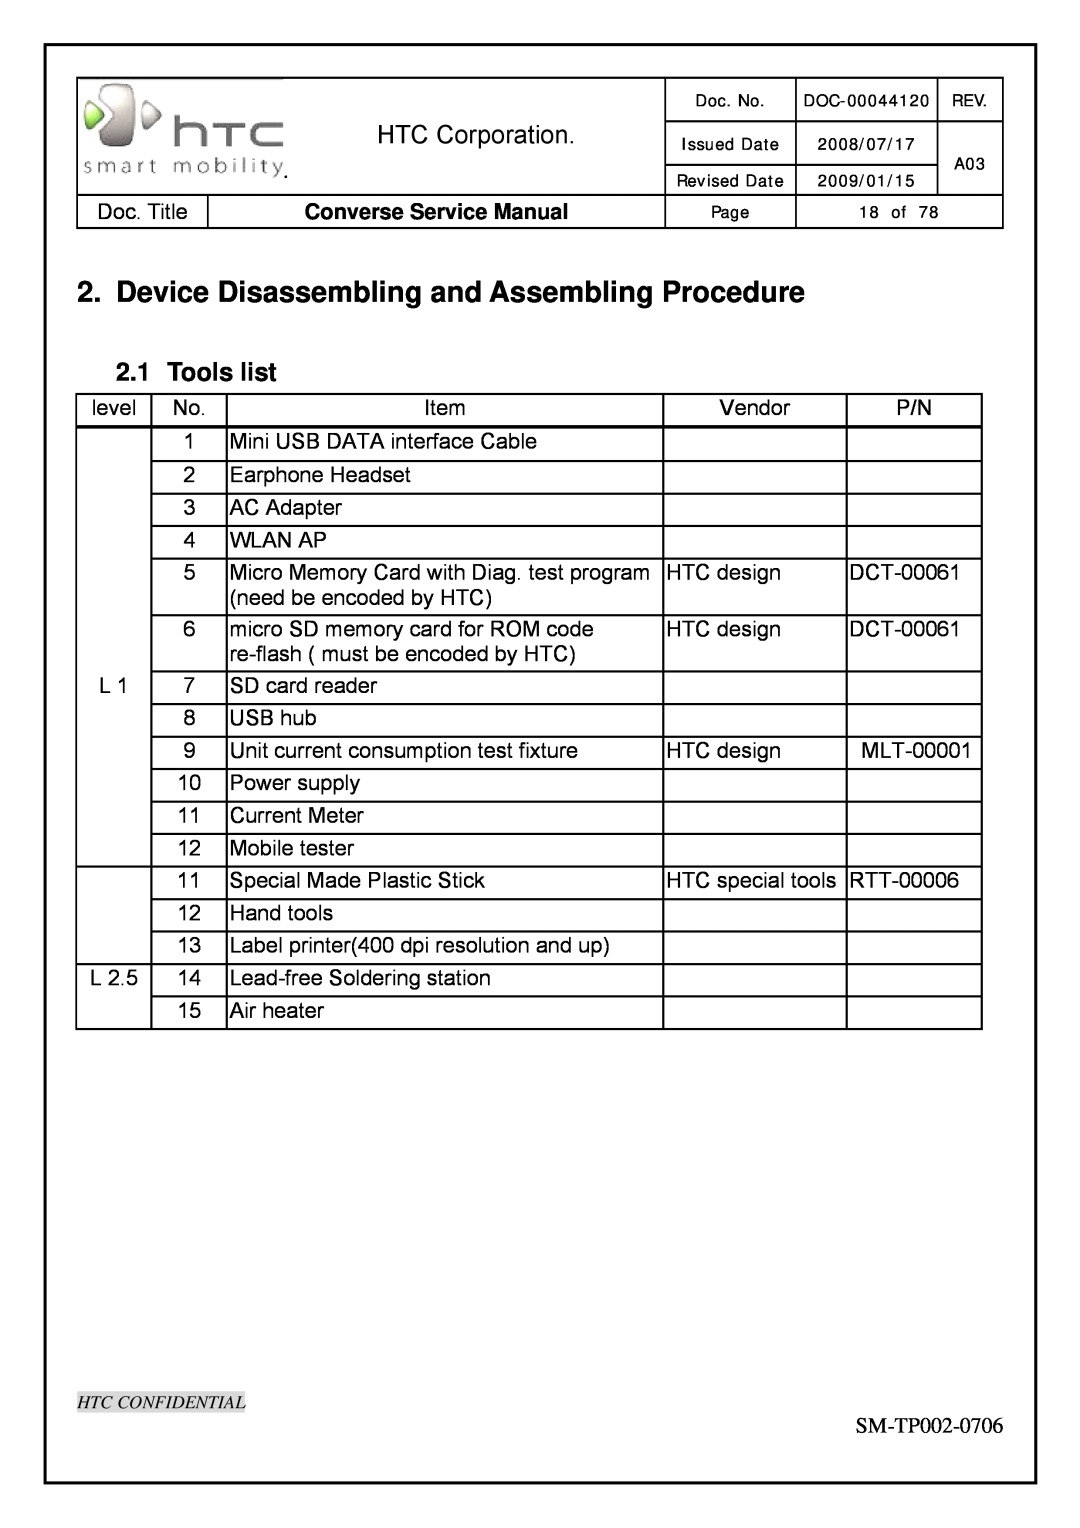 HTC SM-TP002-0706 Device Disassembling and Assembling Procedure, Tools list, HTC Corporation, Converse Service Manual 